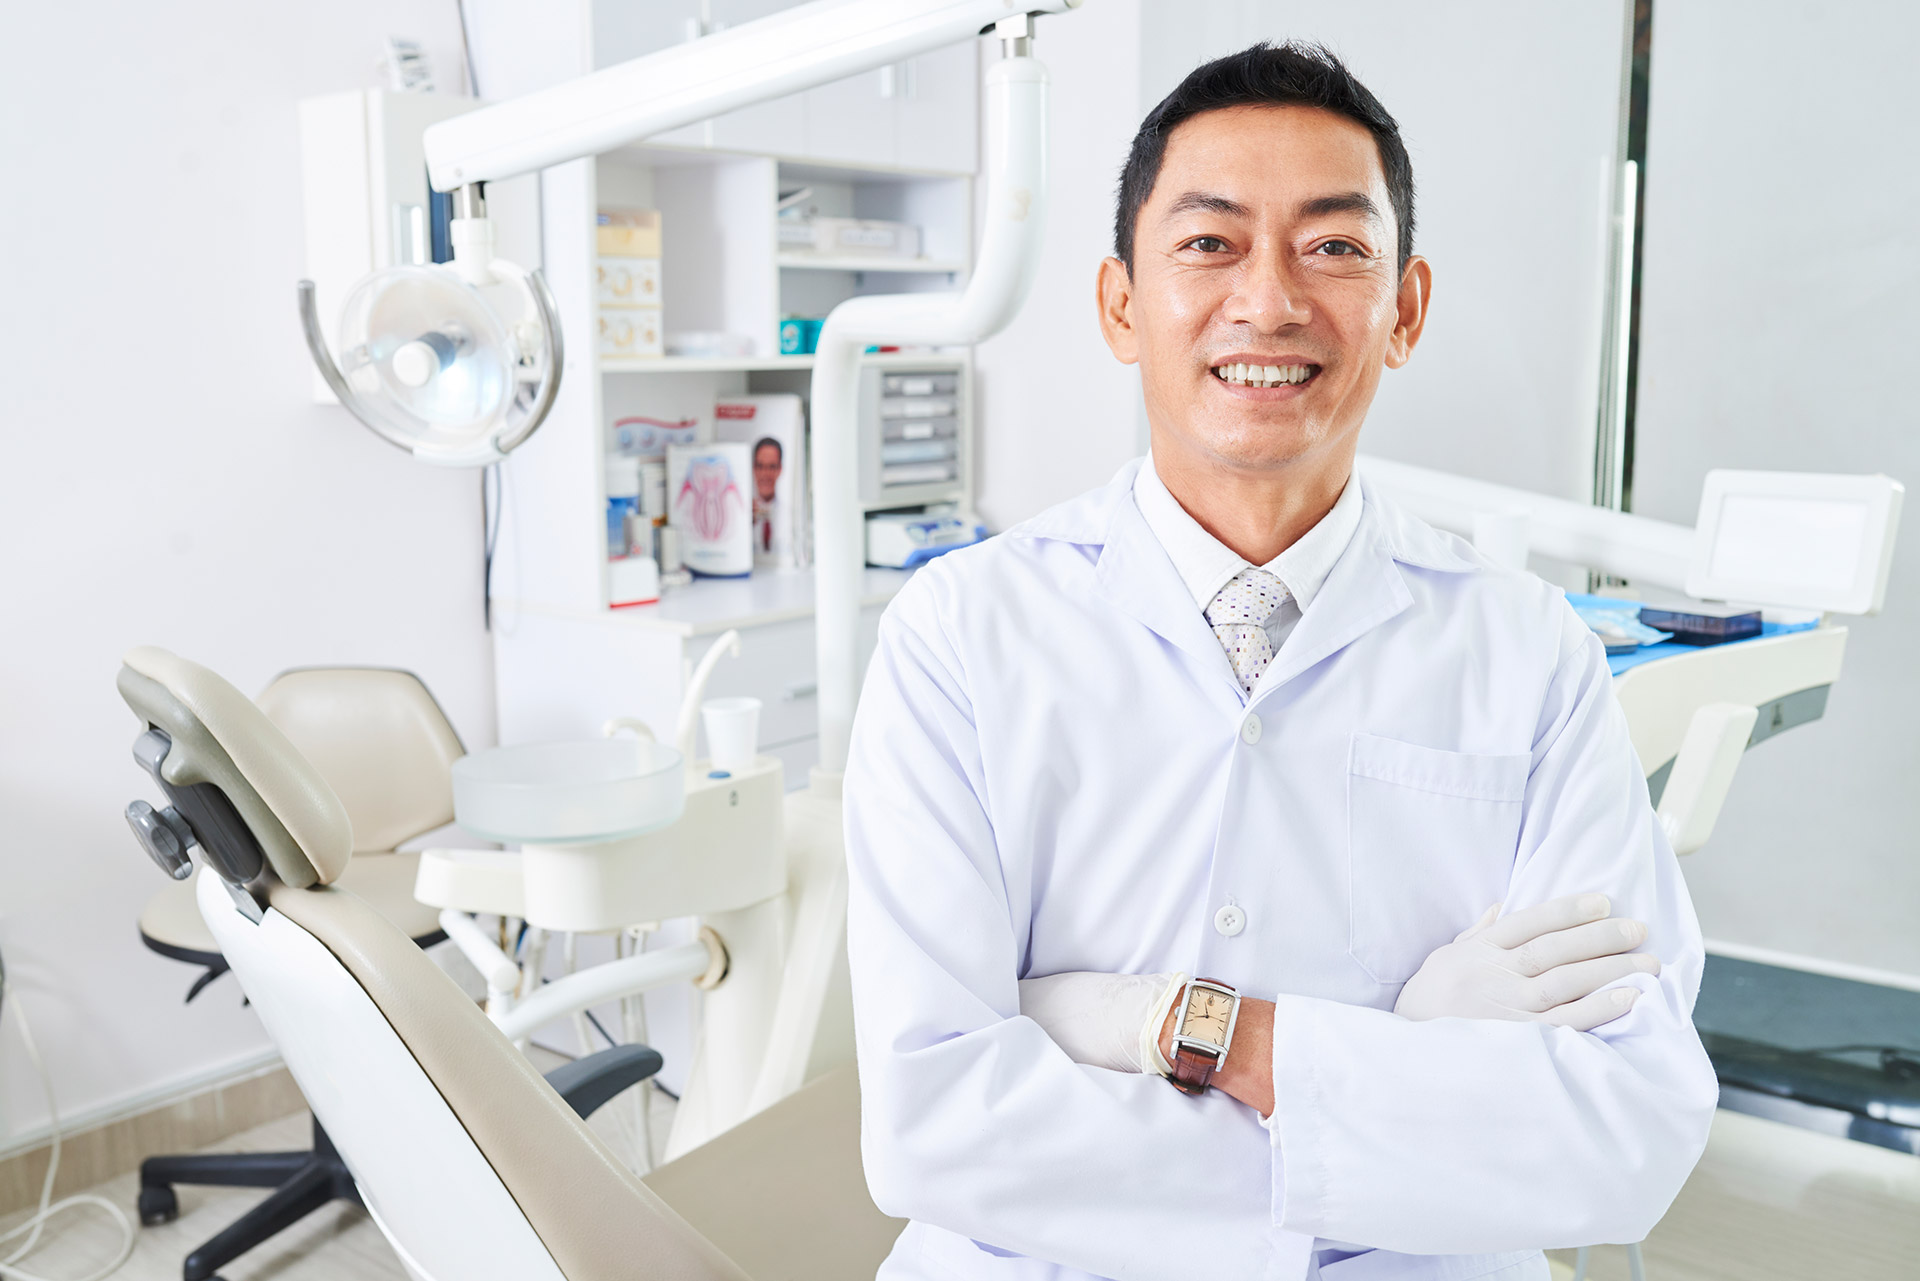 Dentist happy about reaching his surrounding communities through geo-targeted landing pages from BrilliantDoc